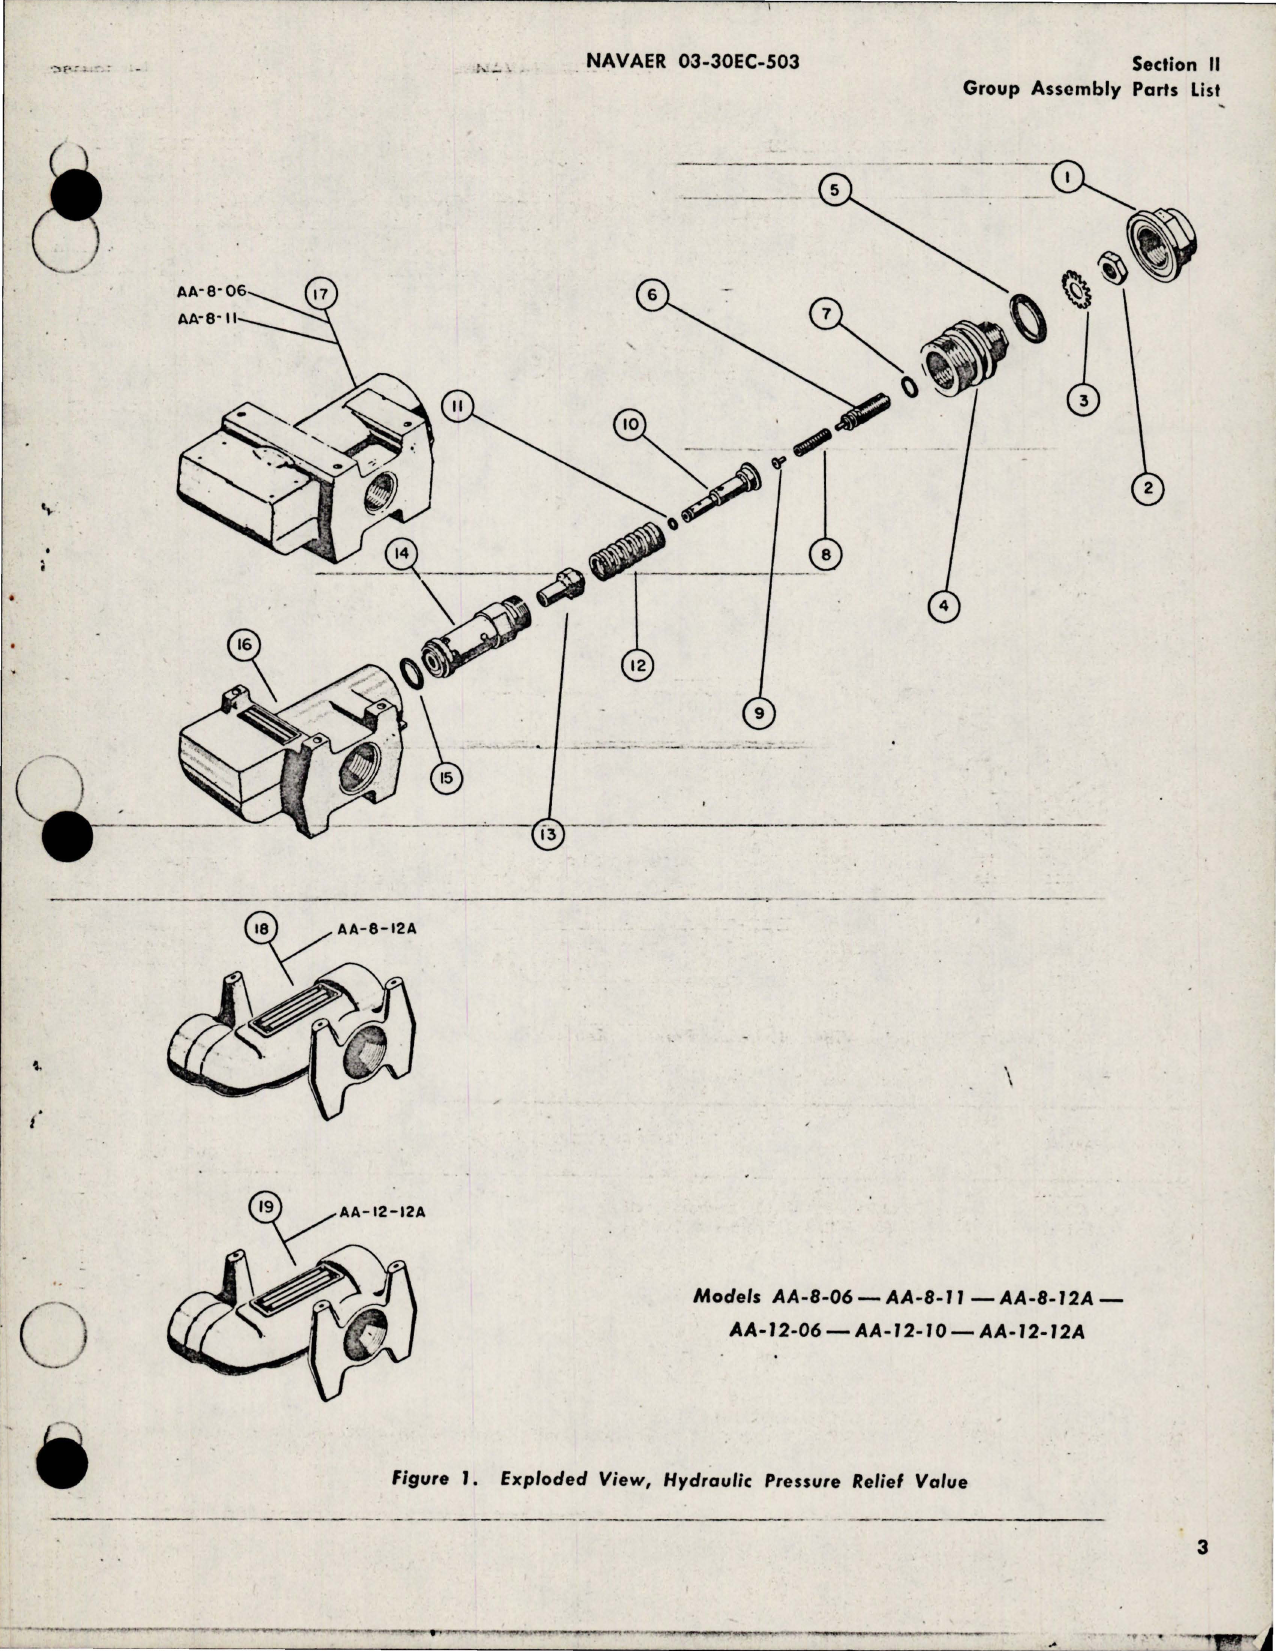 Sample page 5 from AirCorps Library document: Illustrated Parts Breakdown for Hydraulic Pressure Relief Valve